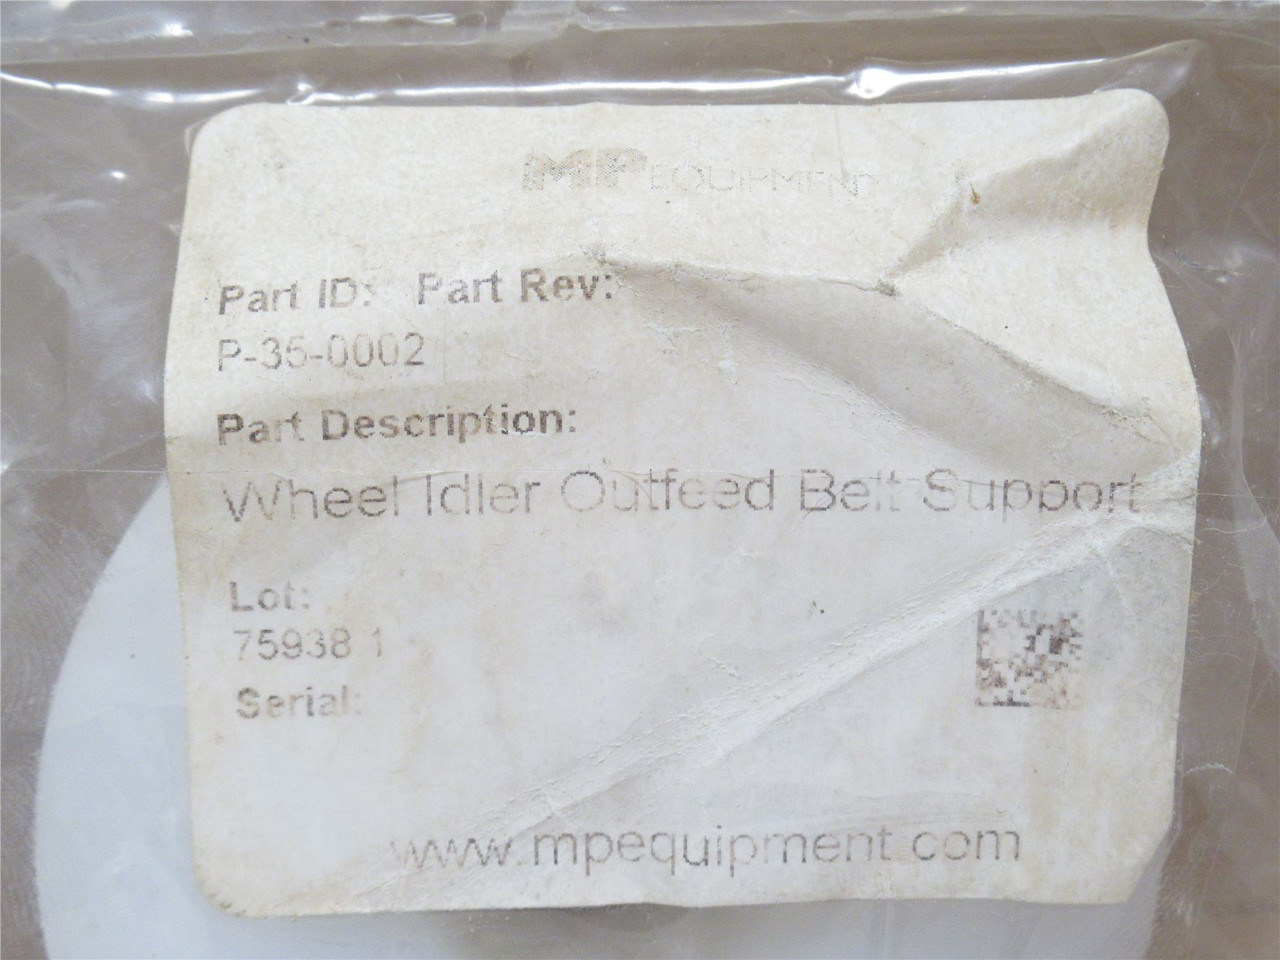 MP Equipment P-35-0002; Outfeed Belt Support Idler Wheel 1"ID